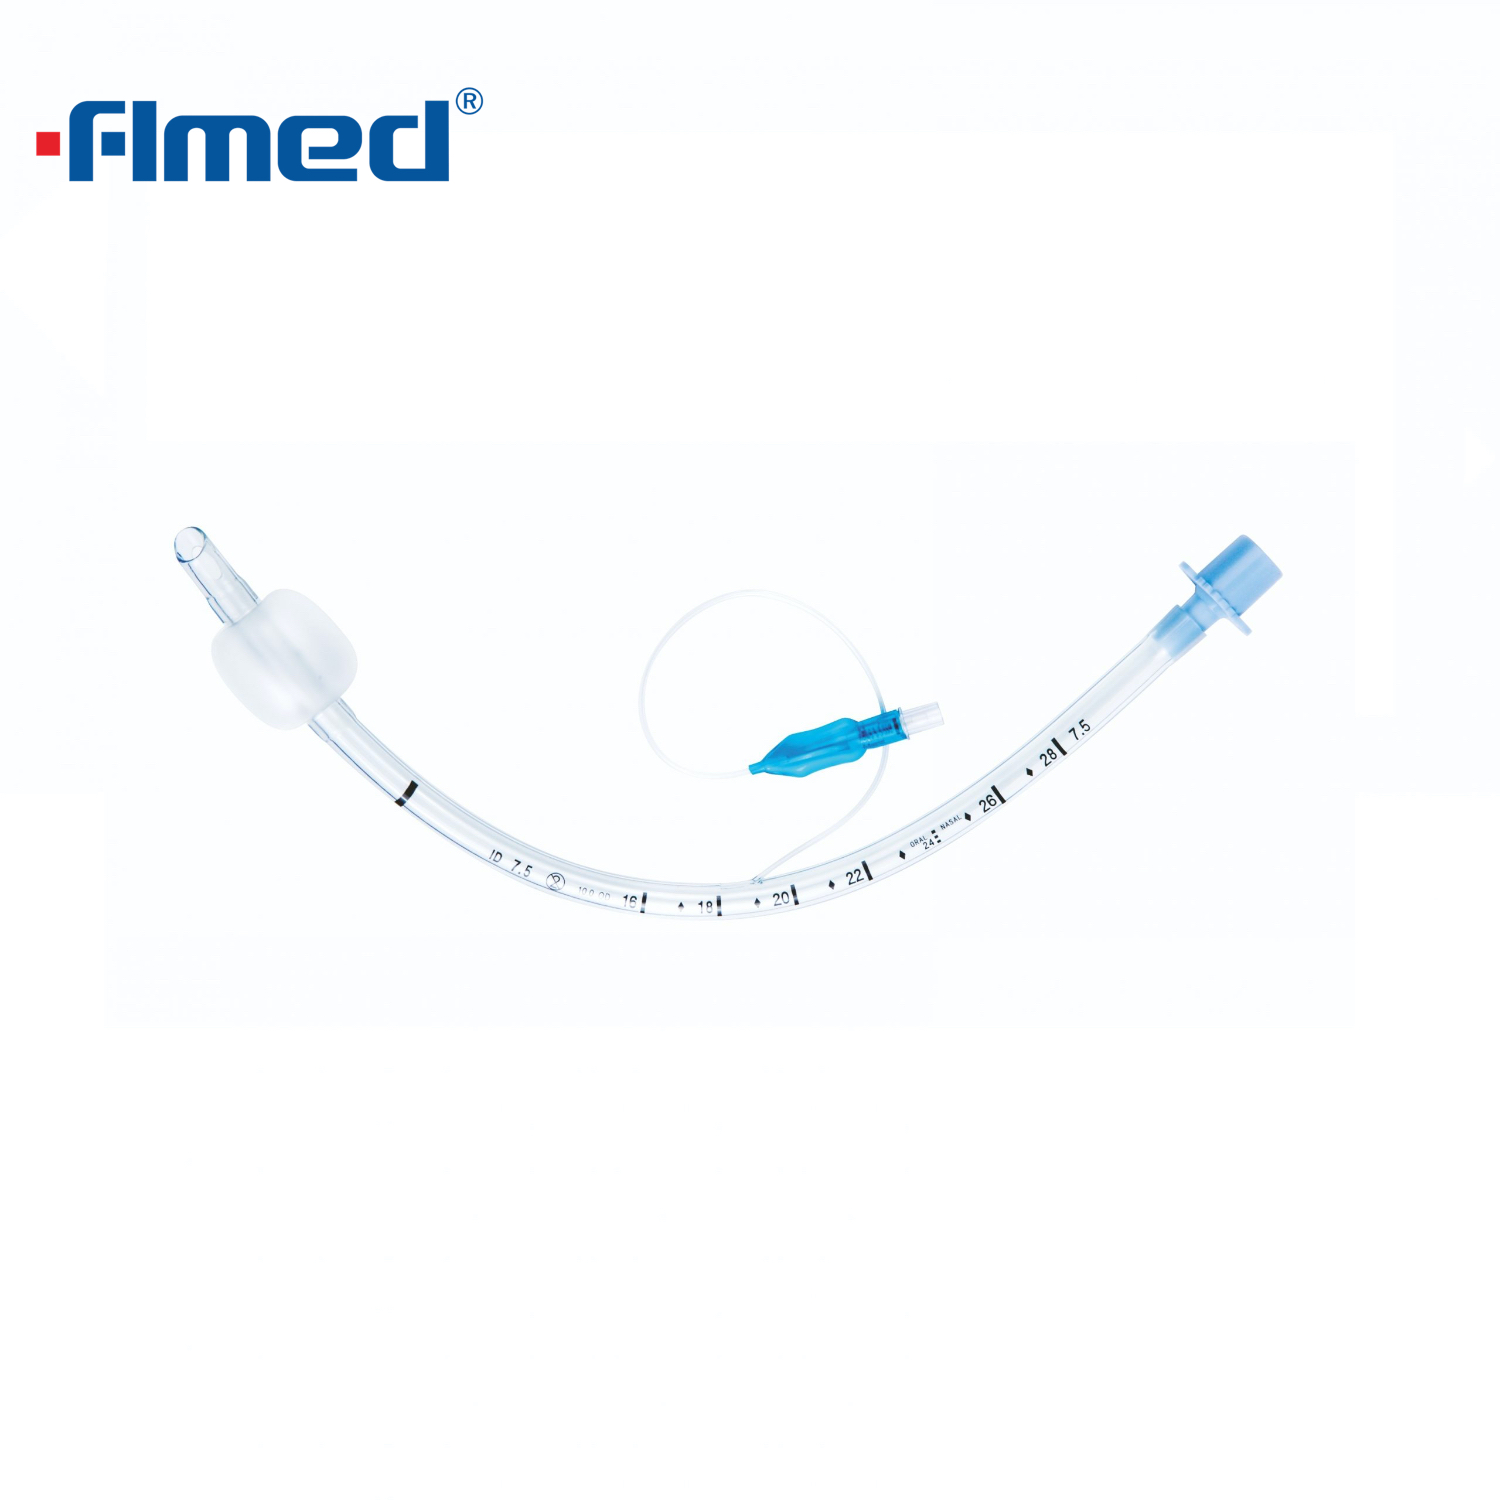 Endotracheal Tube with Suction Catheter